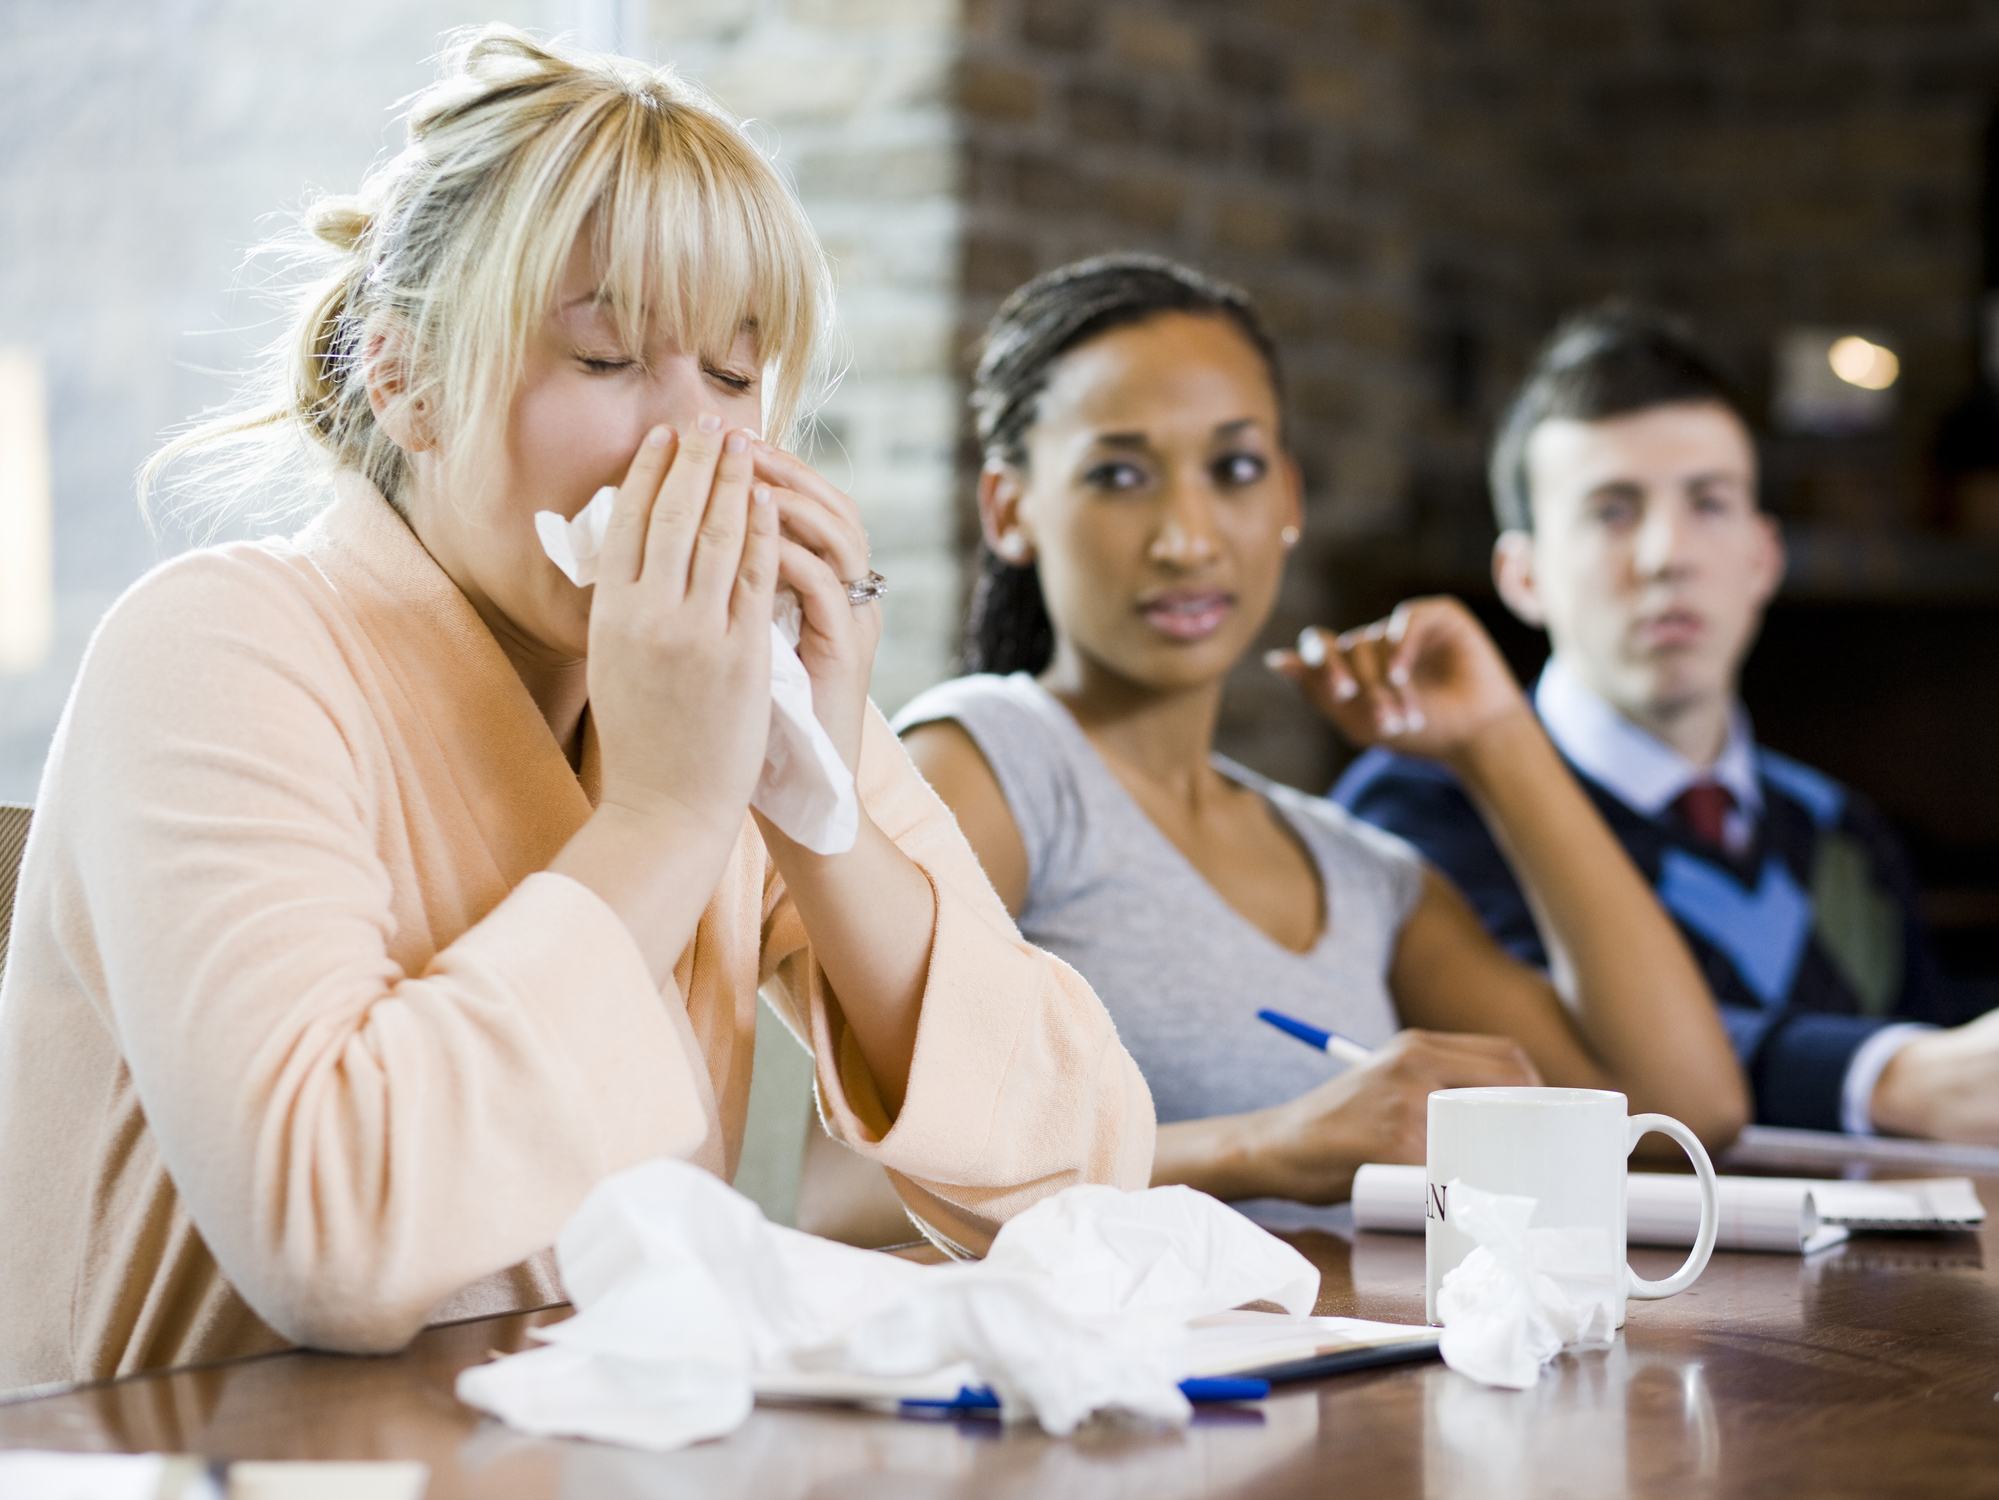 A person sneezing and blowing their nose in a conference room